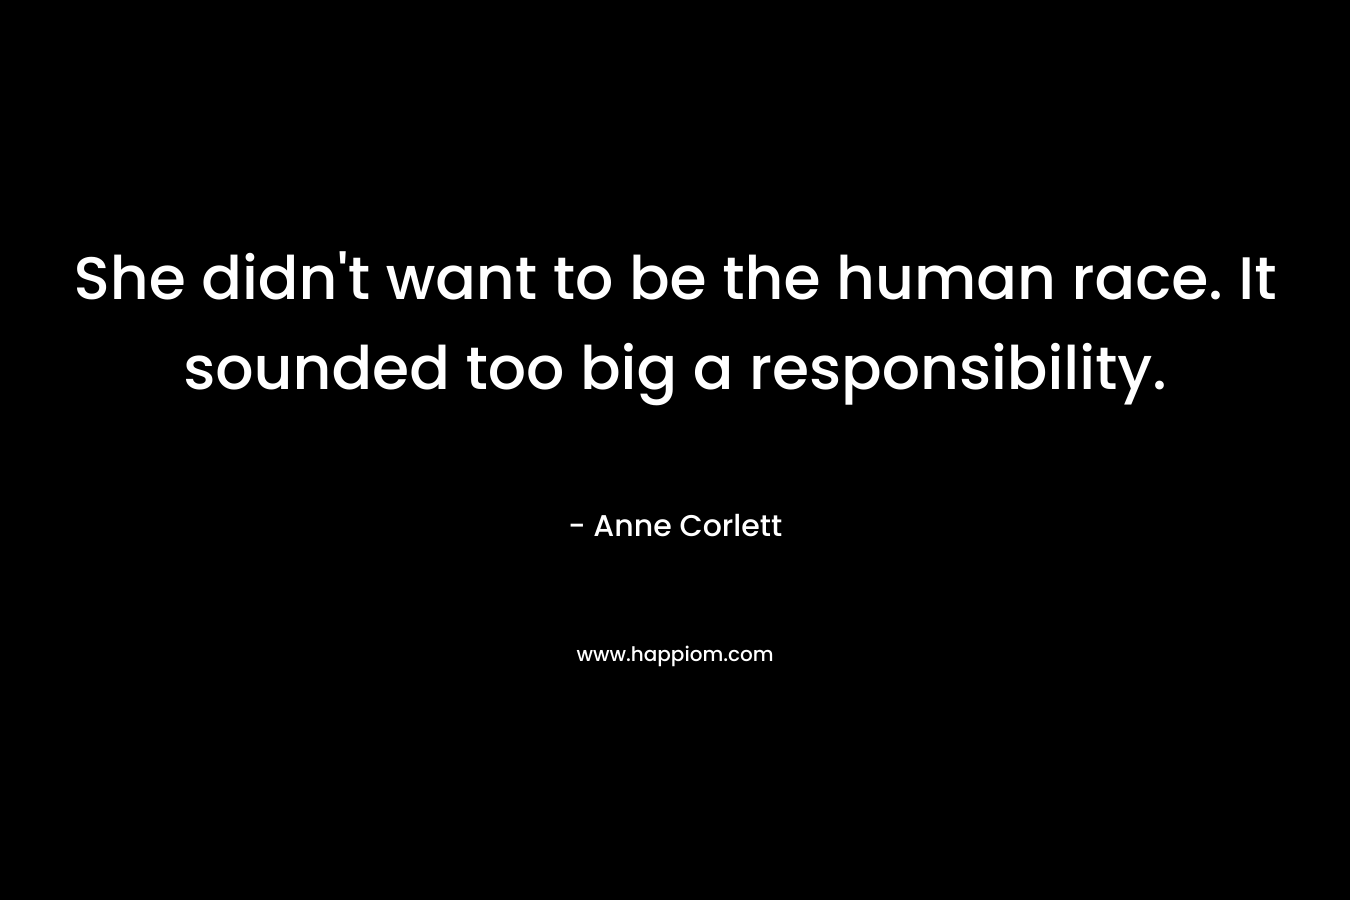 She didn’t want to be the human race. It sounded too big a responsibility. – Anne Corlett